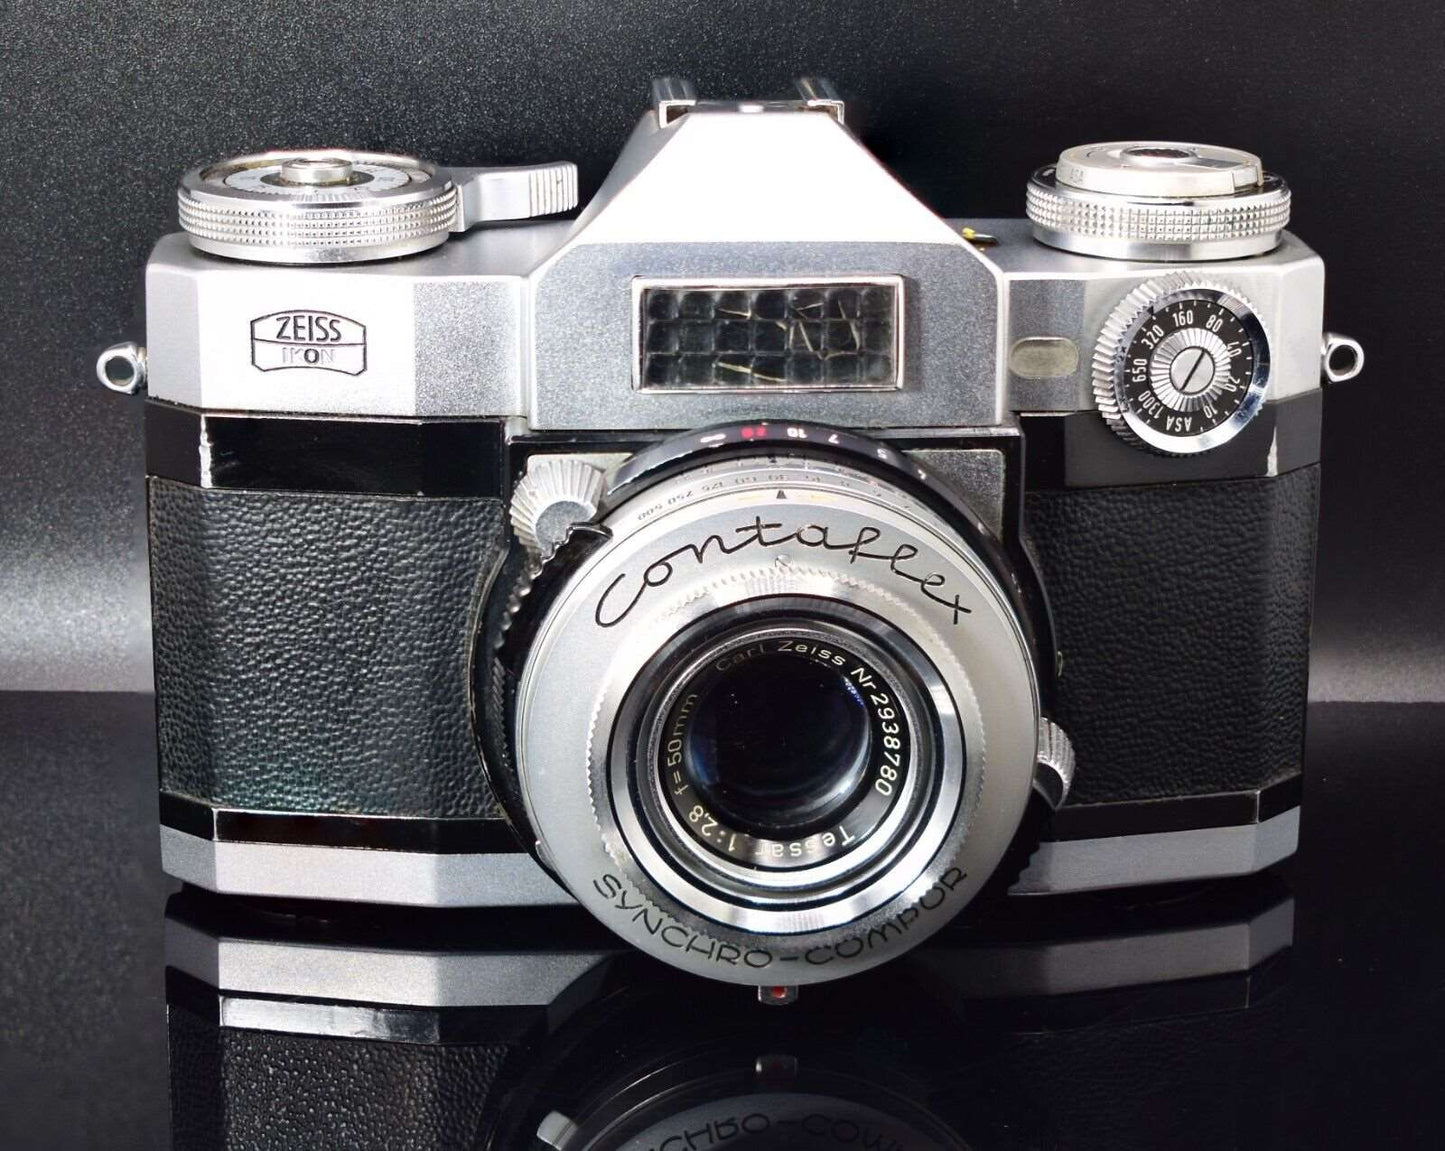 Zeiss Ikon Contaflex Super 35mm Camera with Synchro Compur Shutter and Carl Zeiss Lens